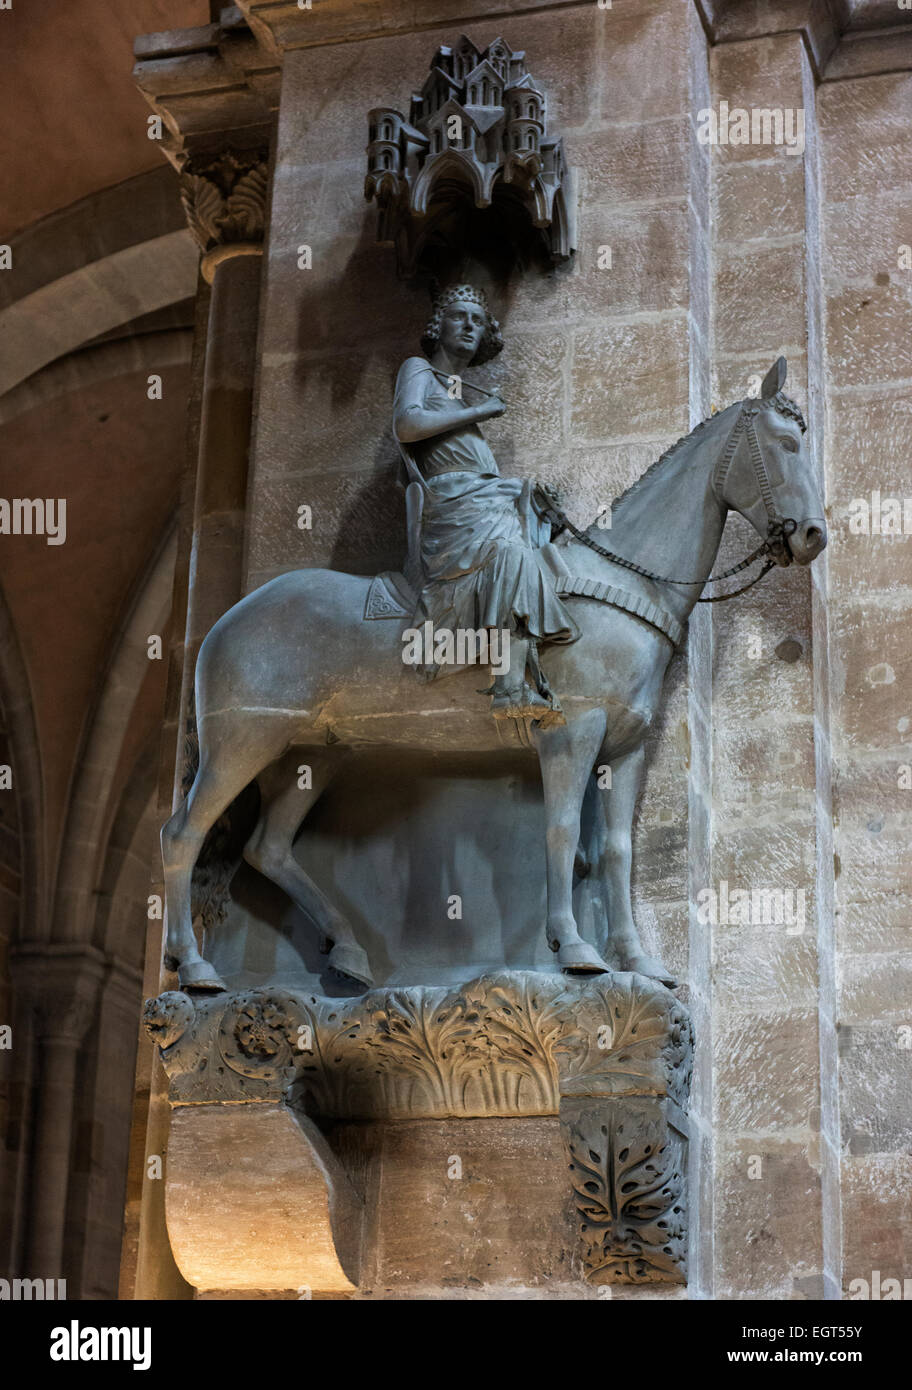 The Bamberger Reiter, an equestrian statue whose identity is unknown, in the Bamberg Cathedral. Stock Photo